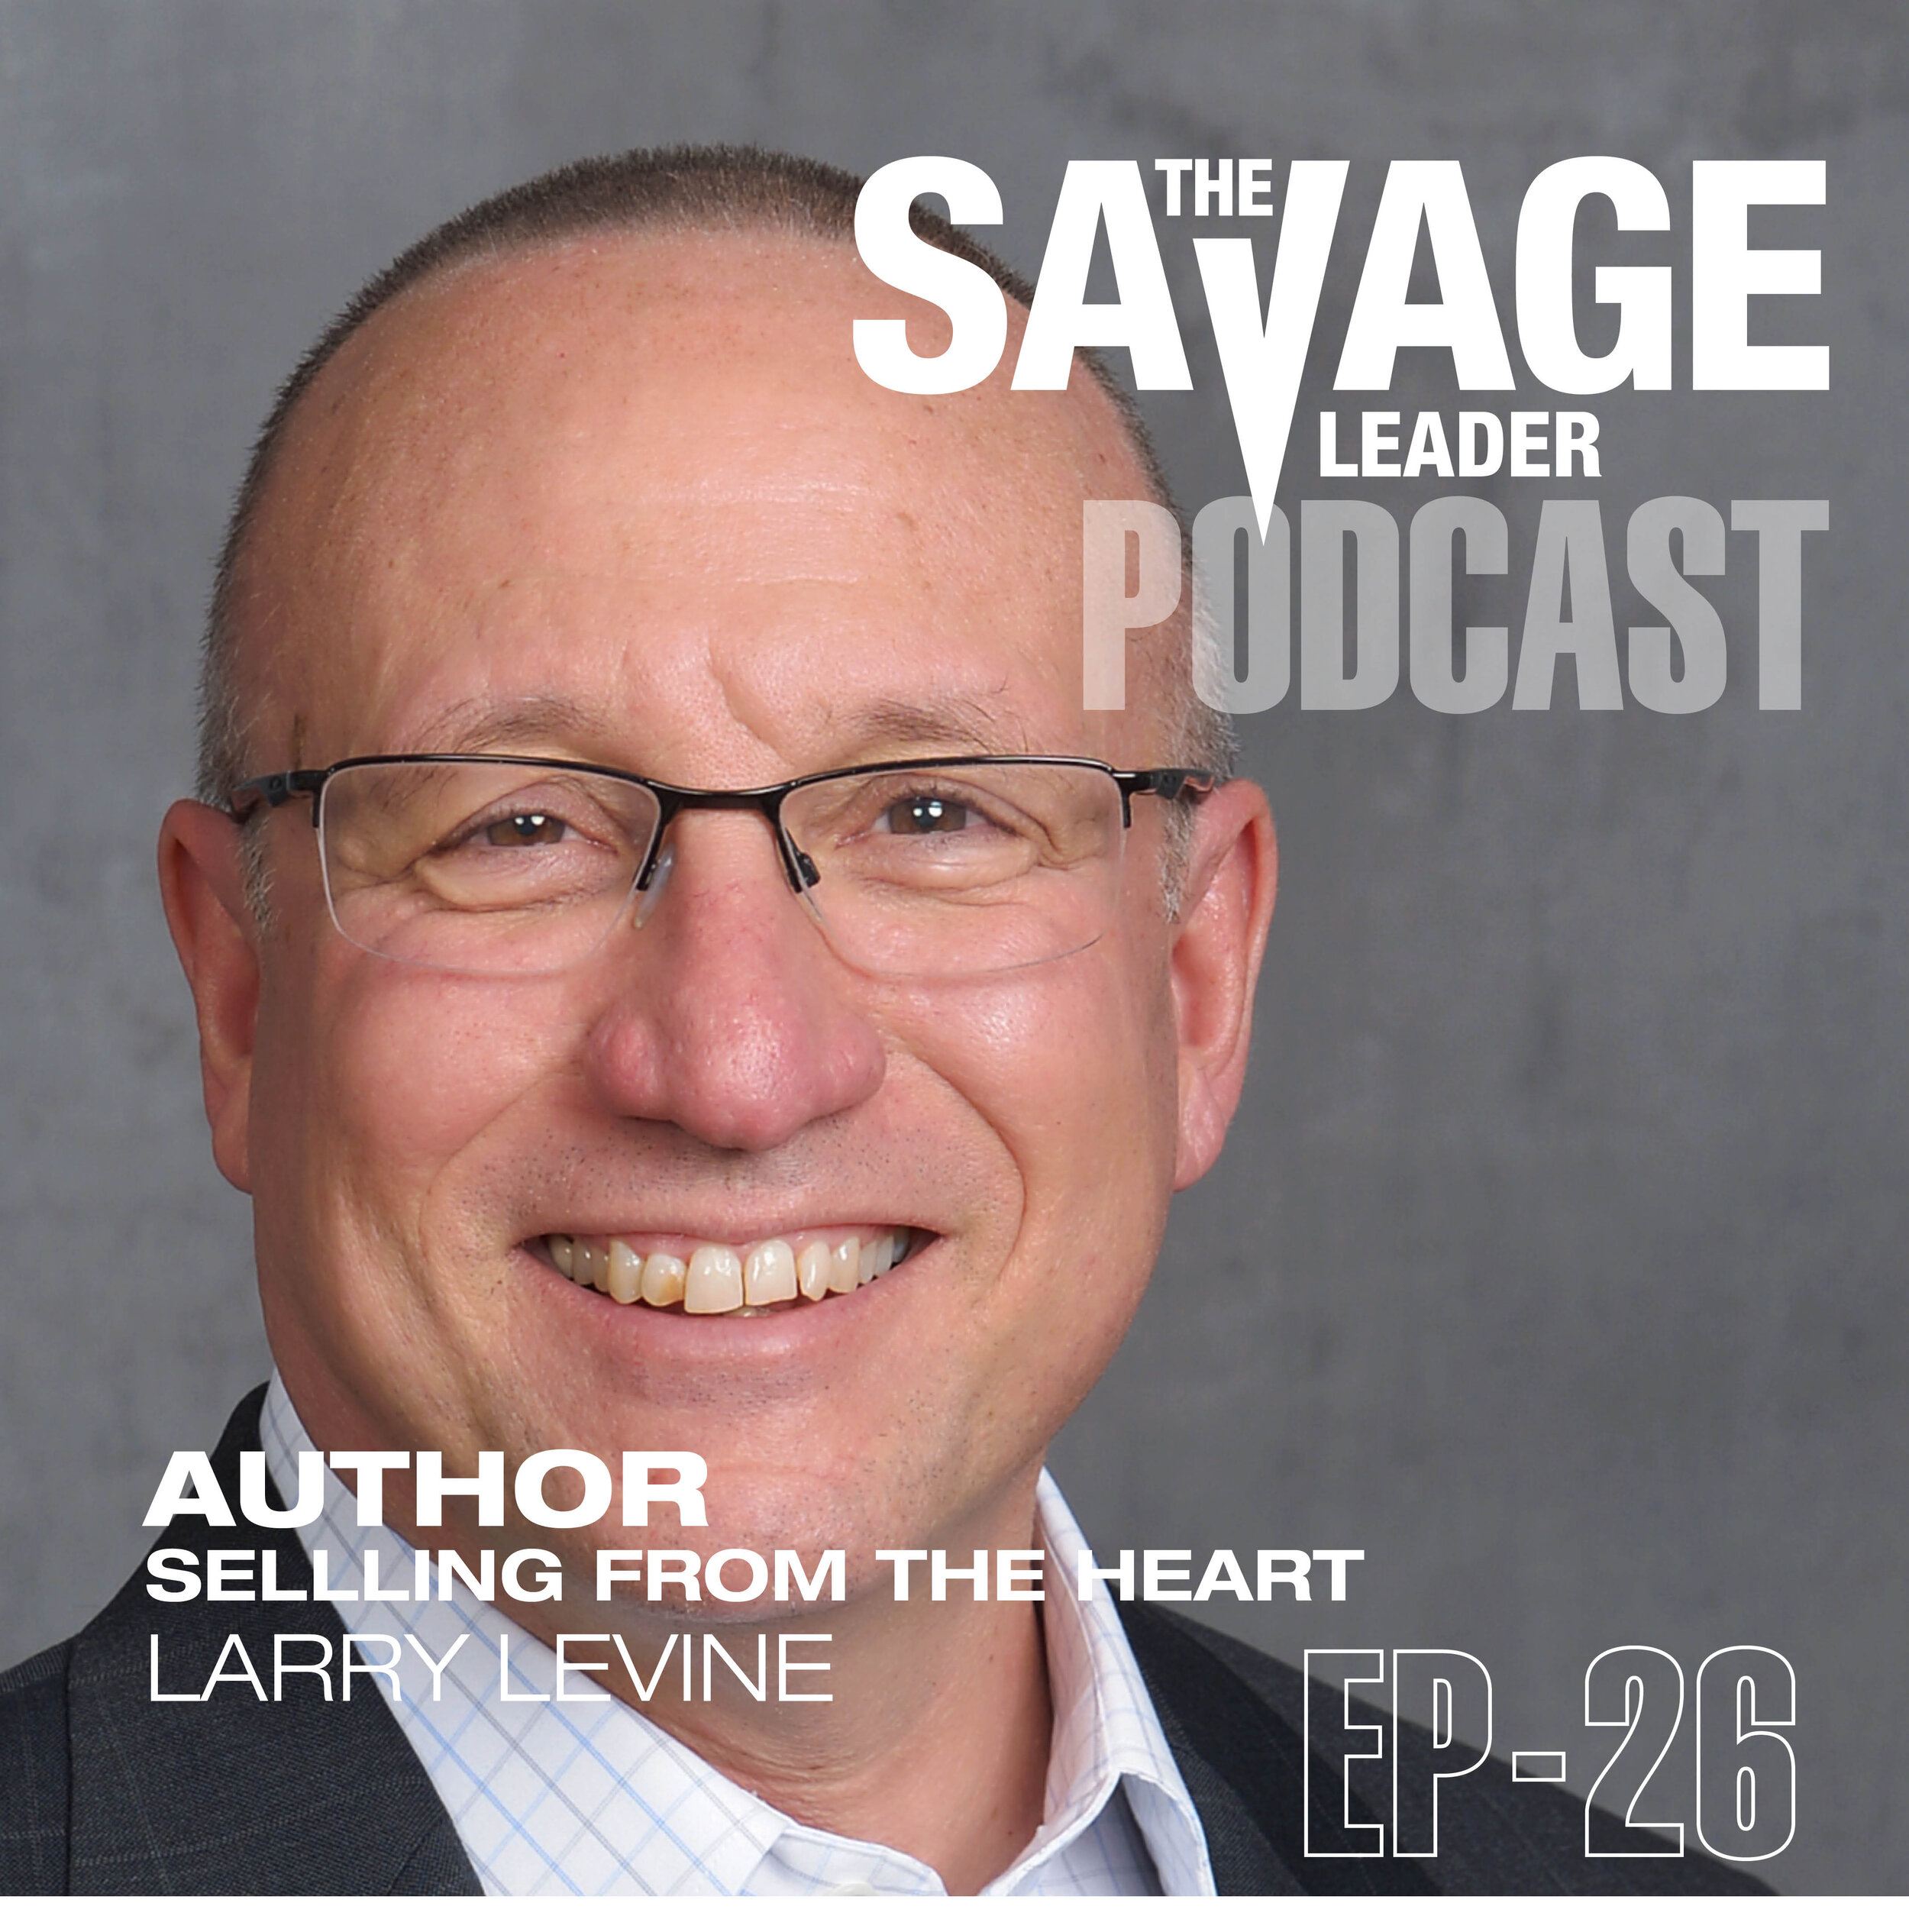 Selling From the Heart Author Larry Levine on How to Sell Authentically  through Care and Emotion — The Savage Leader